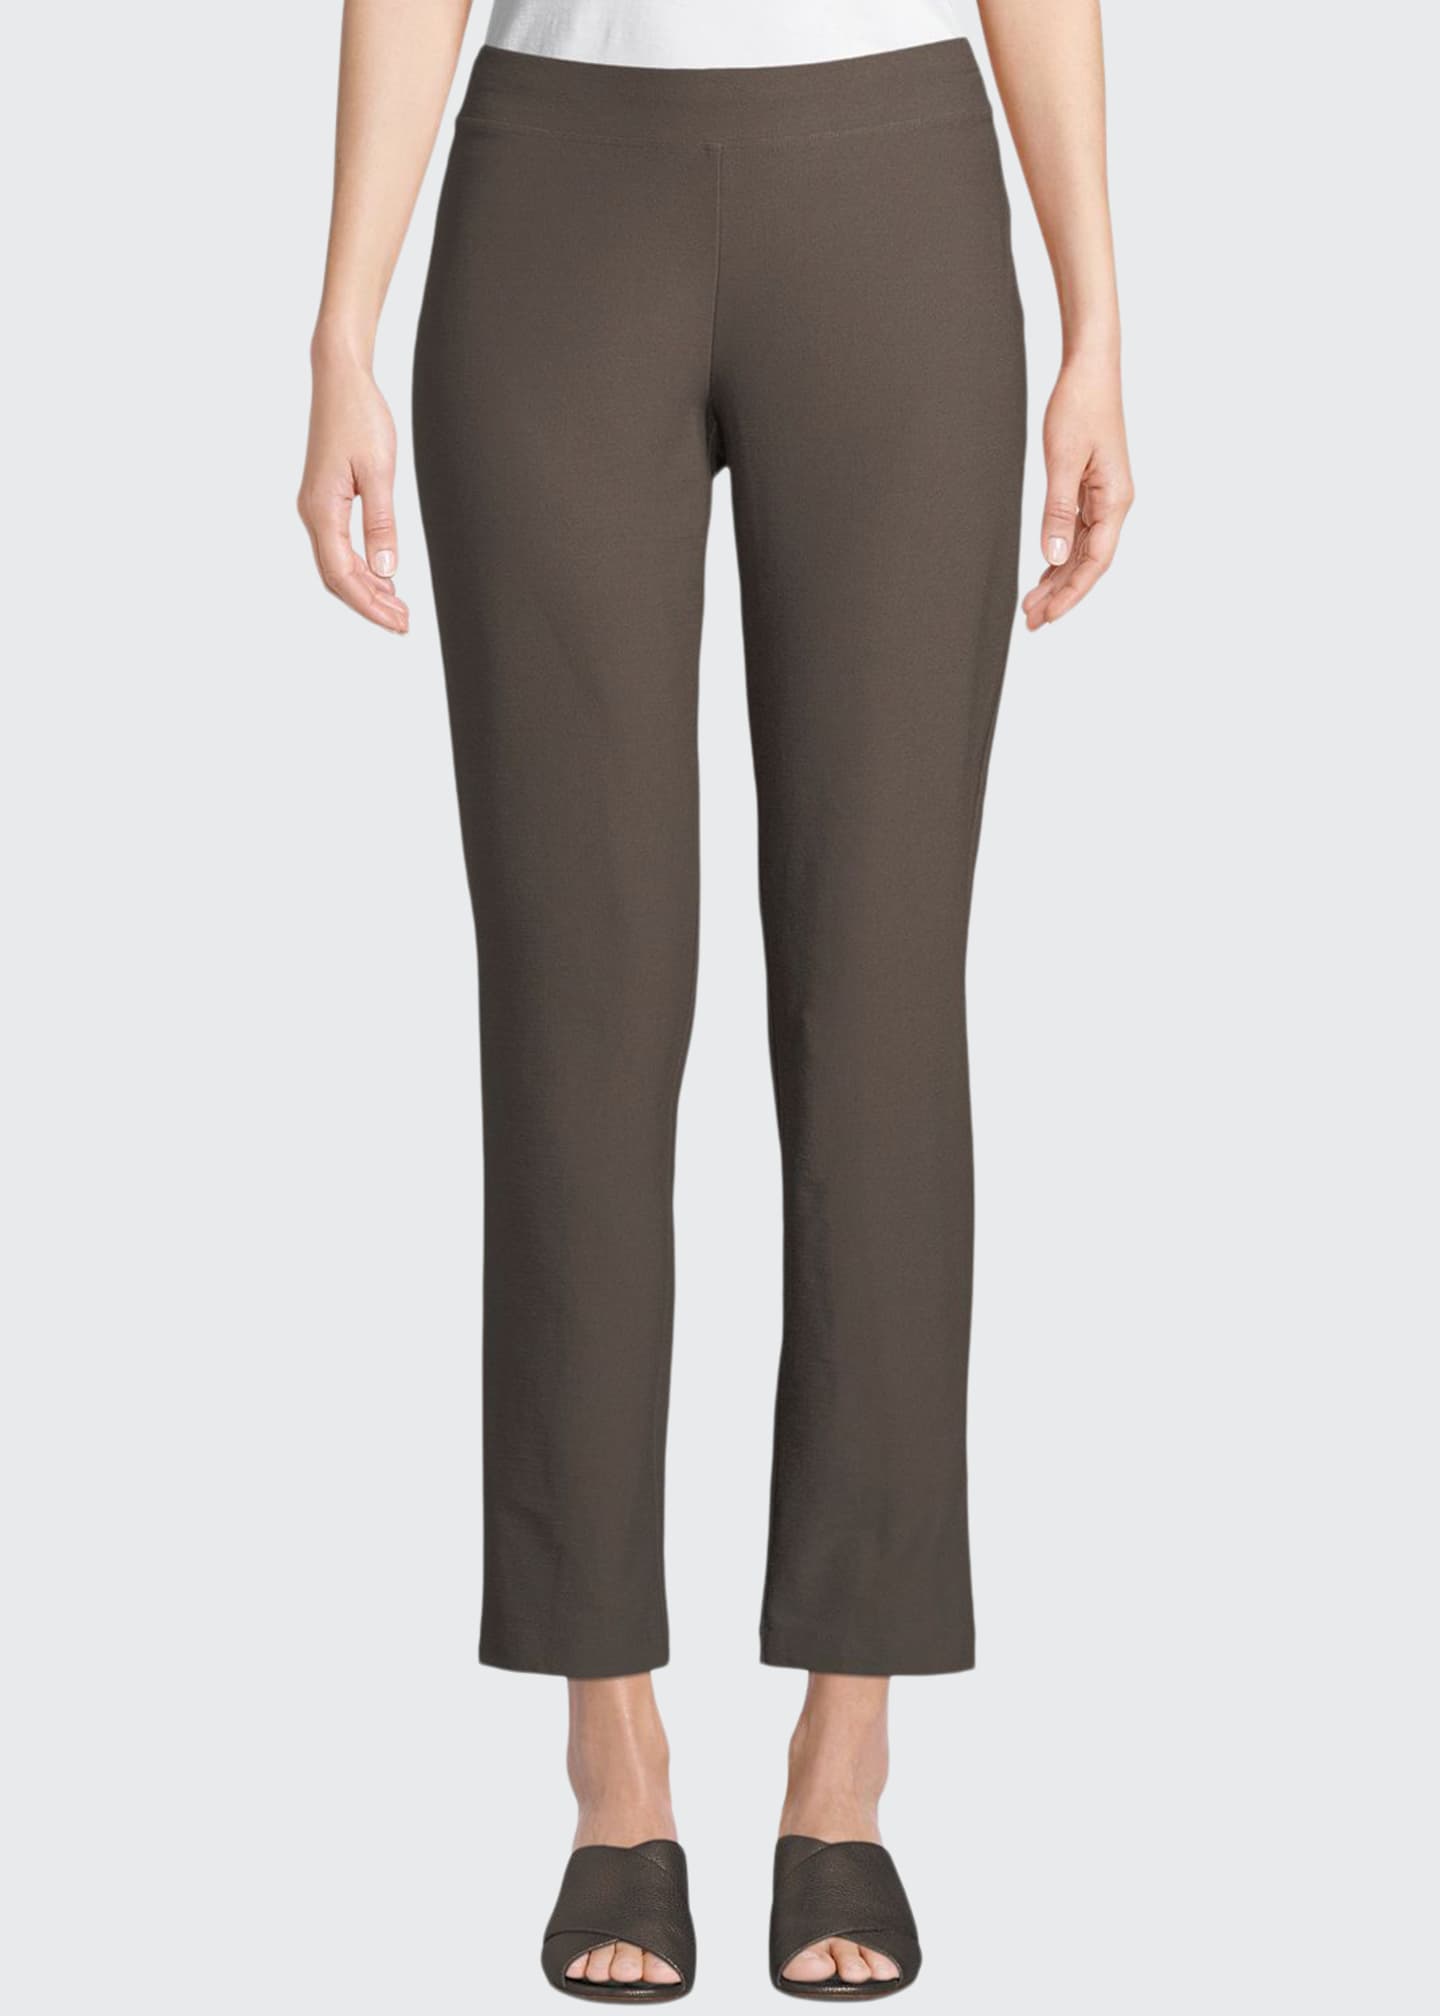 SLIM ANKLE STRETCH CREPE PANT - The Boutique